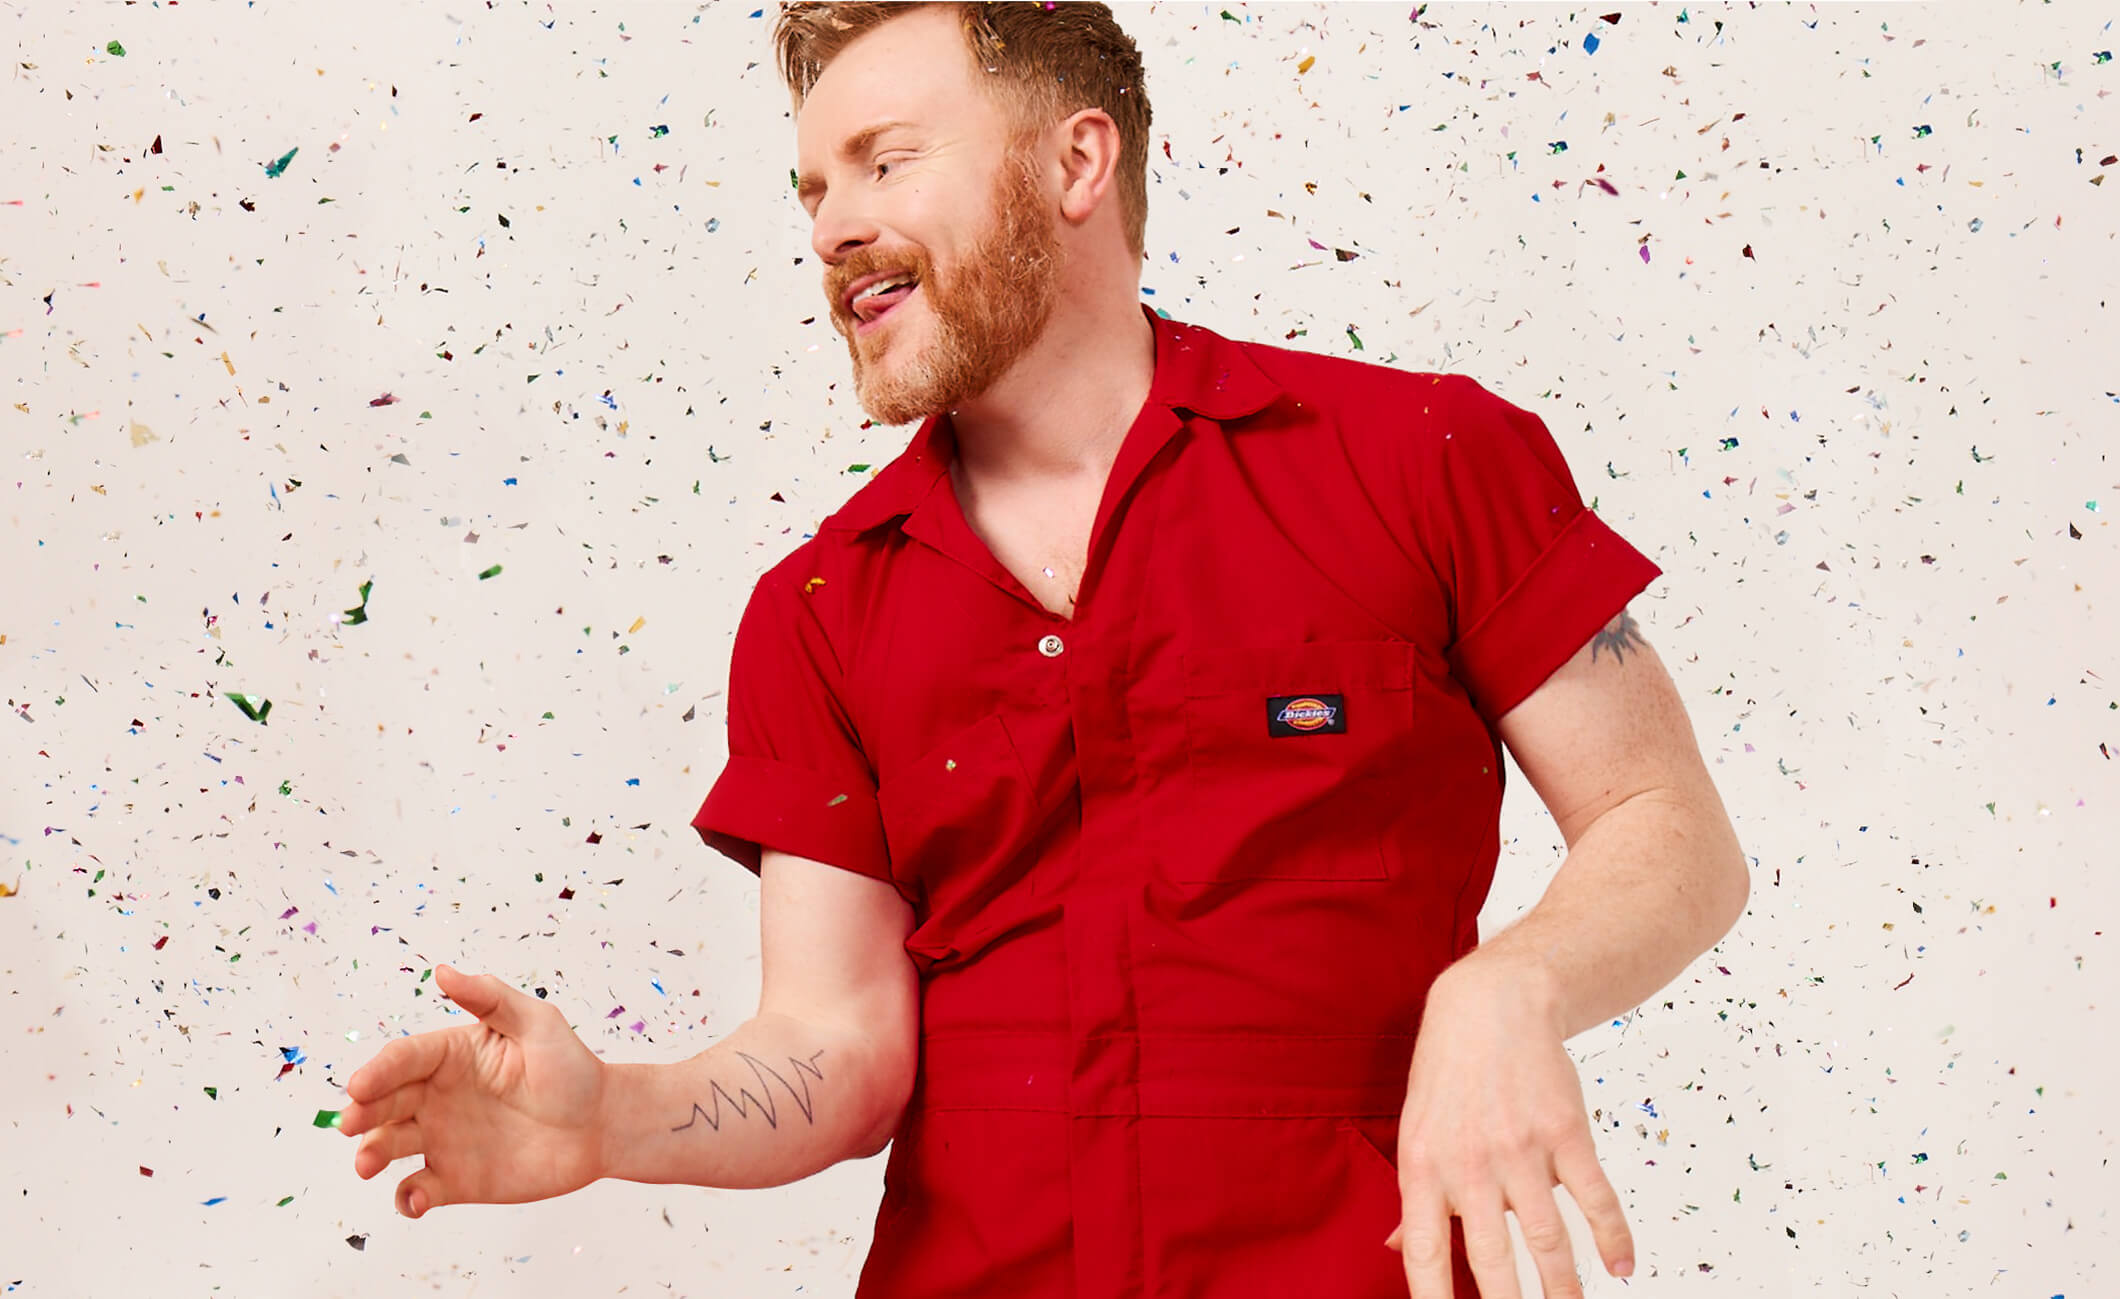 Man dancing in red shirt and speckled background